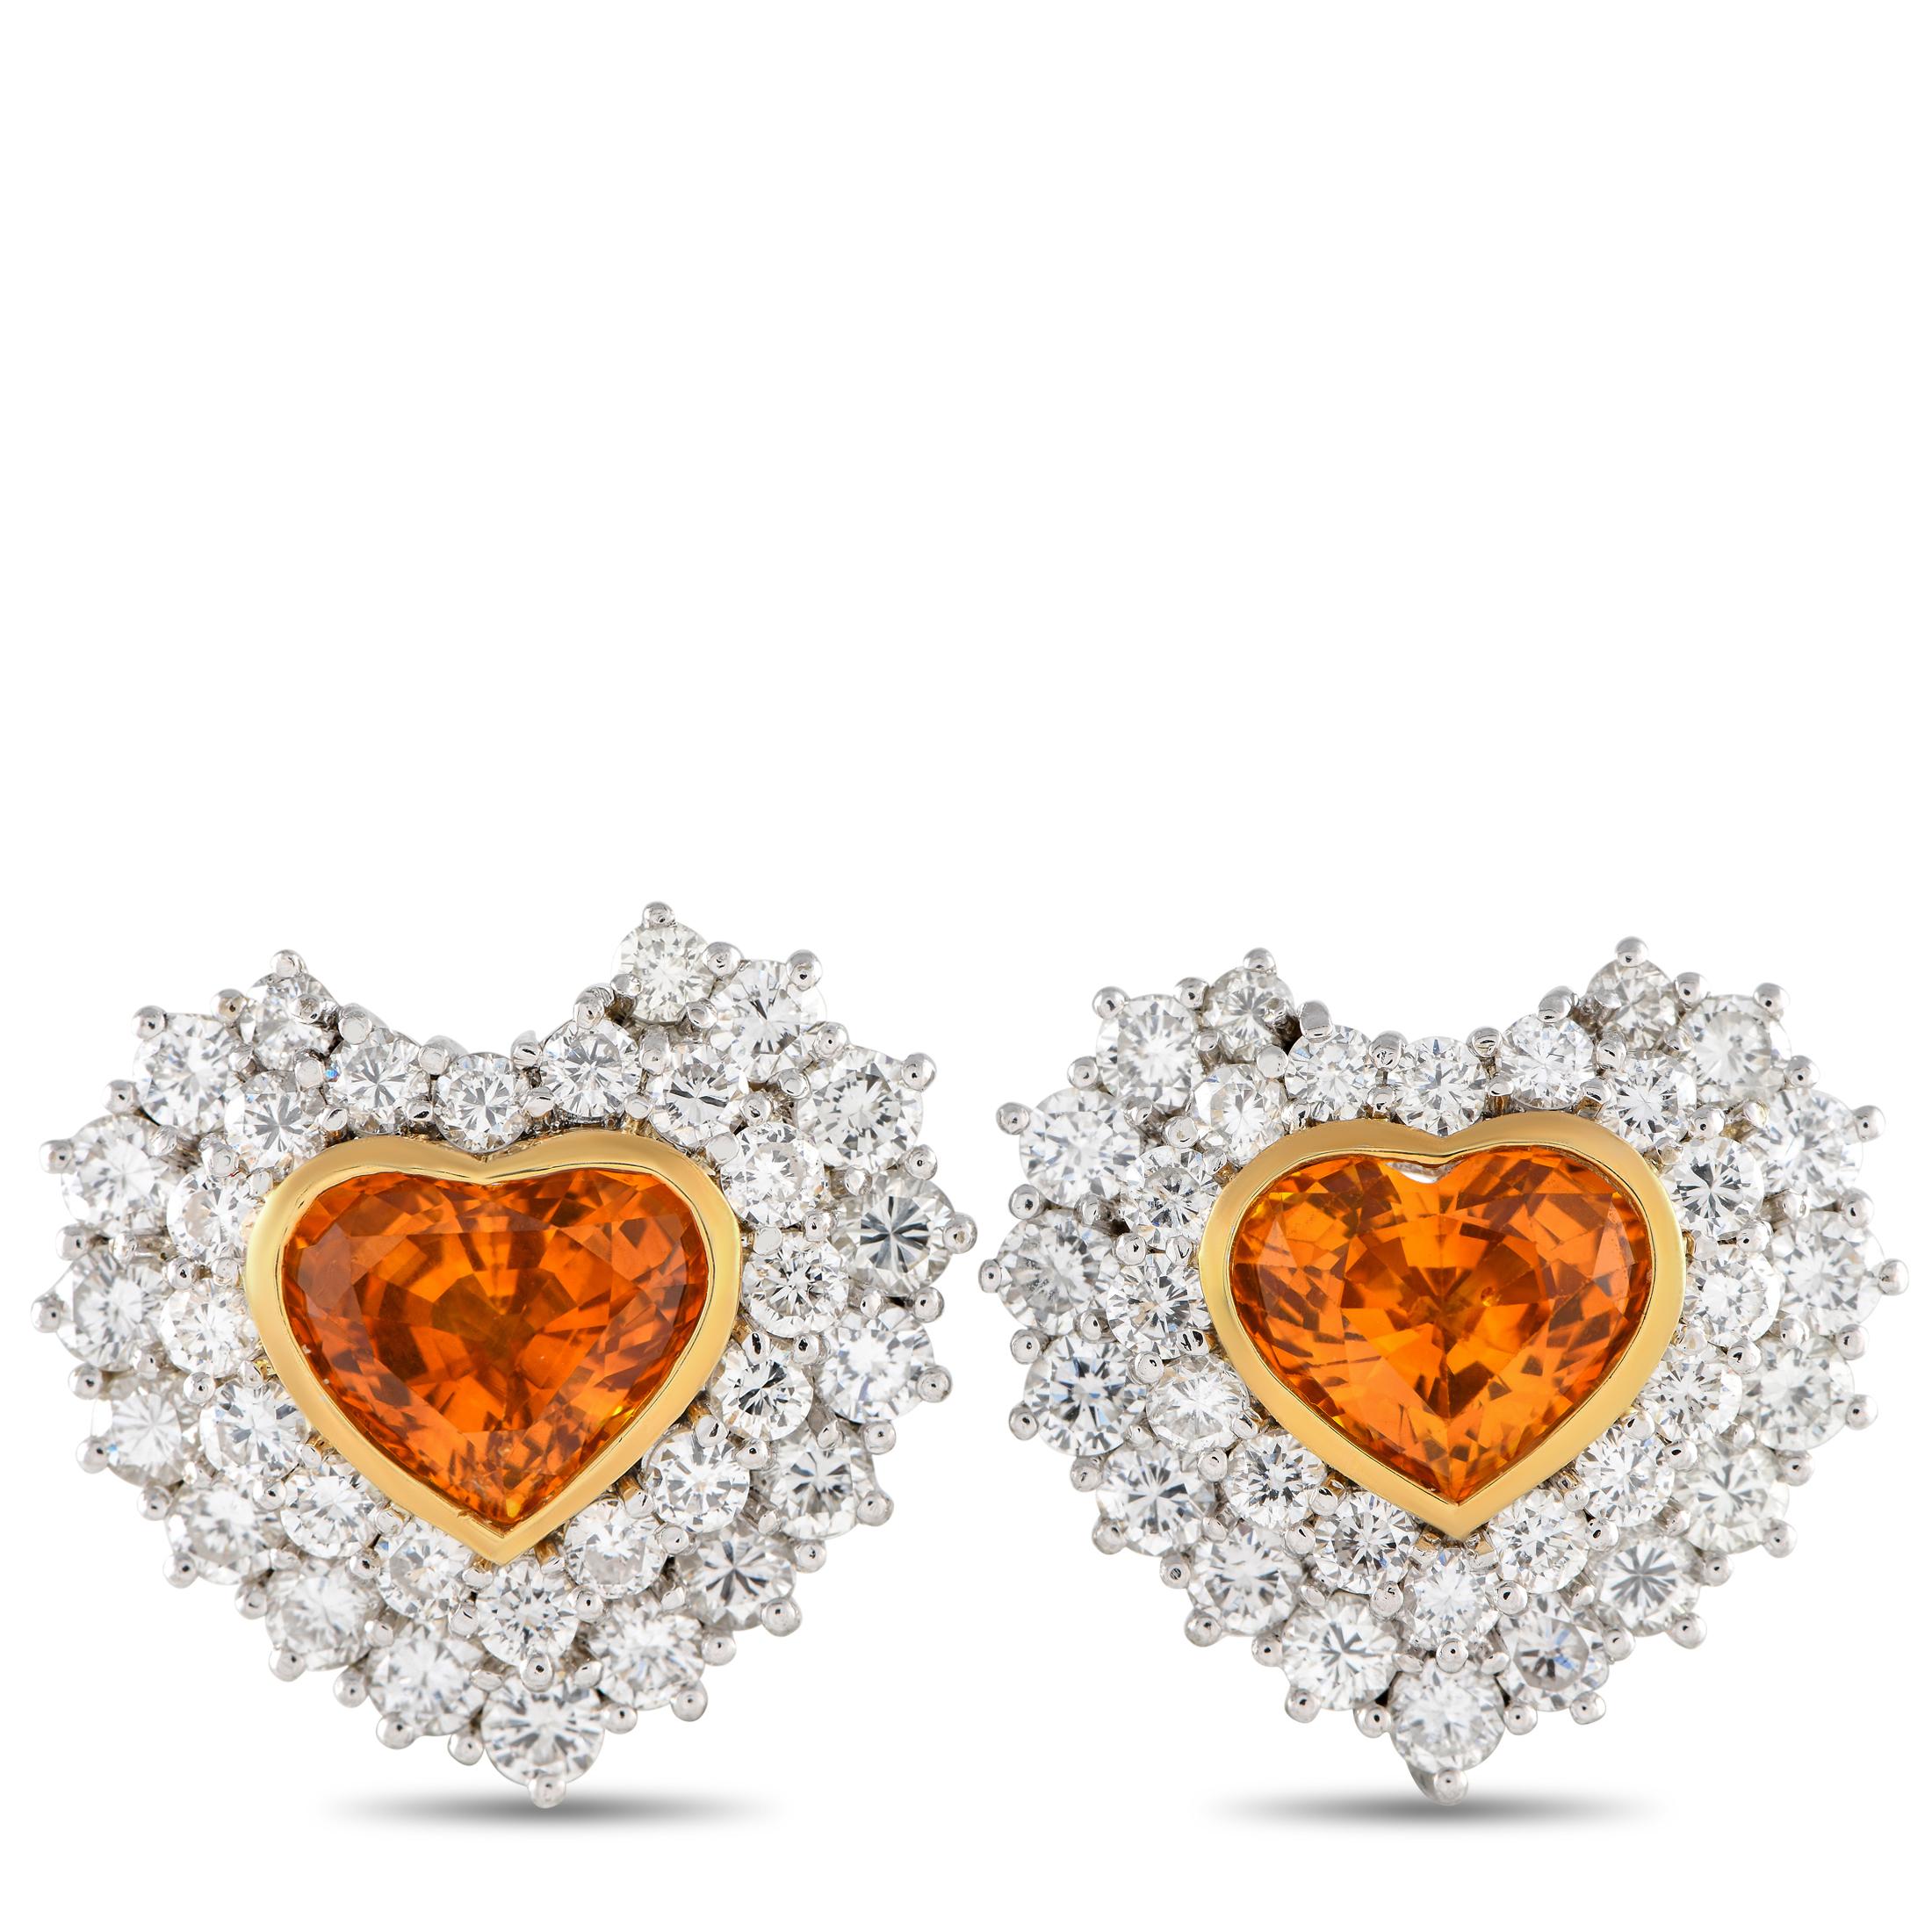 18K White and Yellow Gold 3.62ct Diamond and Sapphire Heart Earrings In Excellent Condition For Sale In Southampton, PA